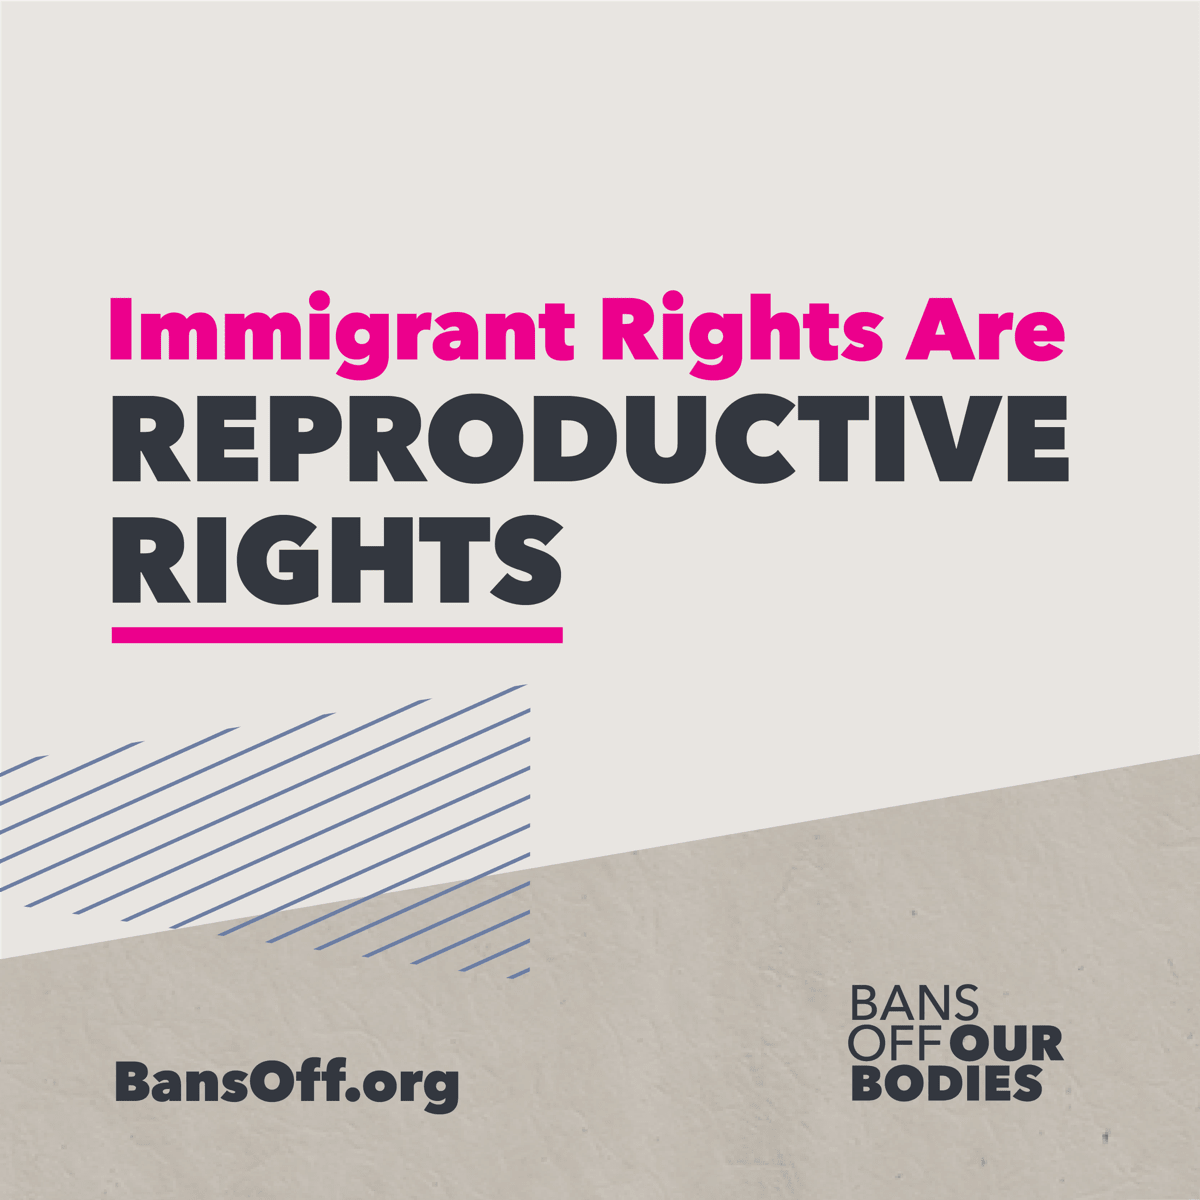 This is a grey square that says "Immigrant rights are reproductive rights"